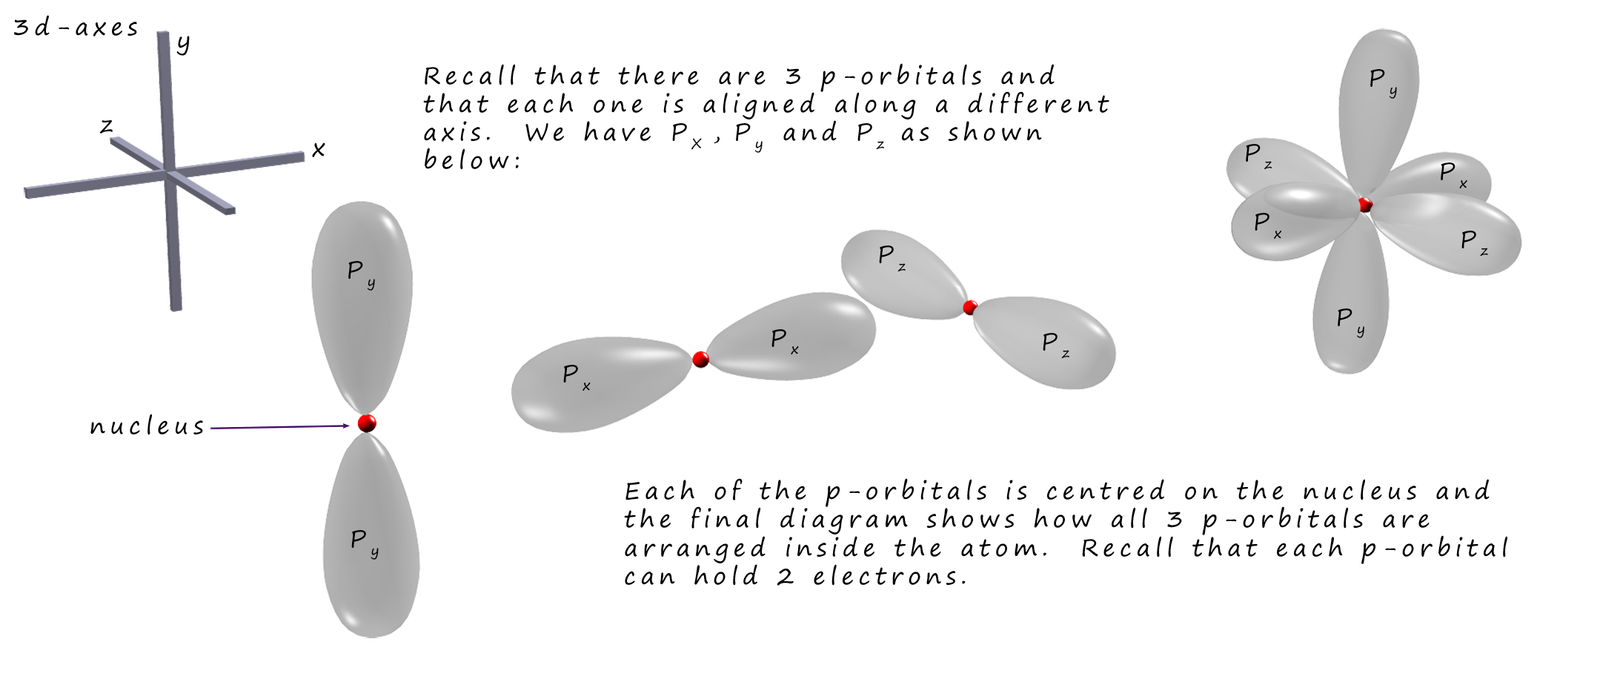 3d models of the p-orbitals showing the px, py and pz orbitals.